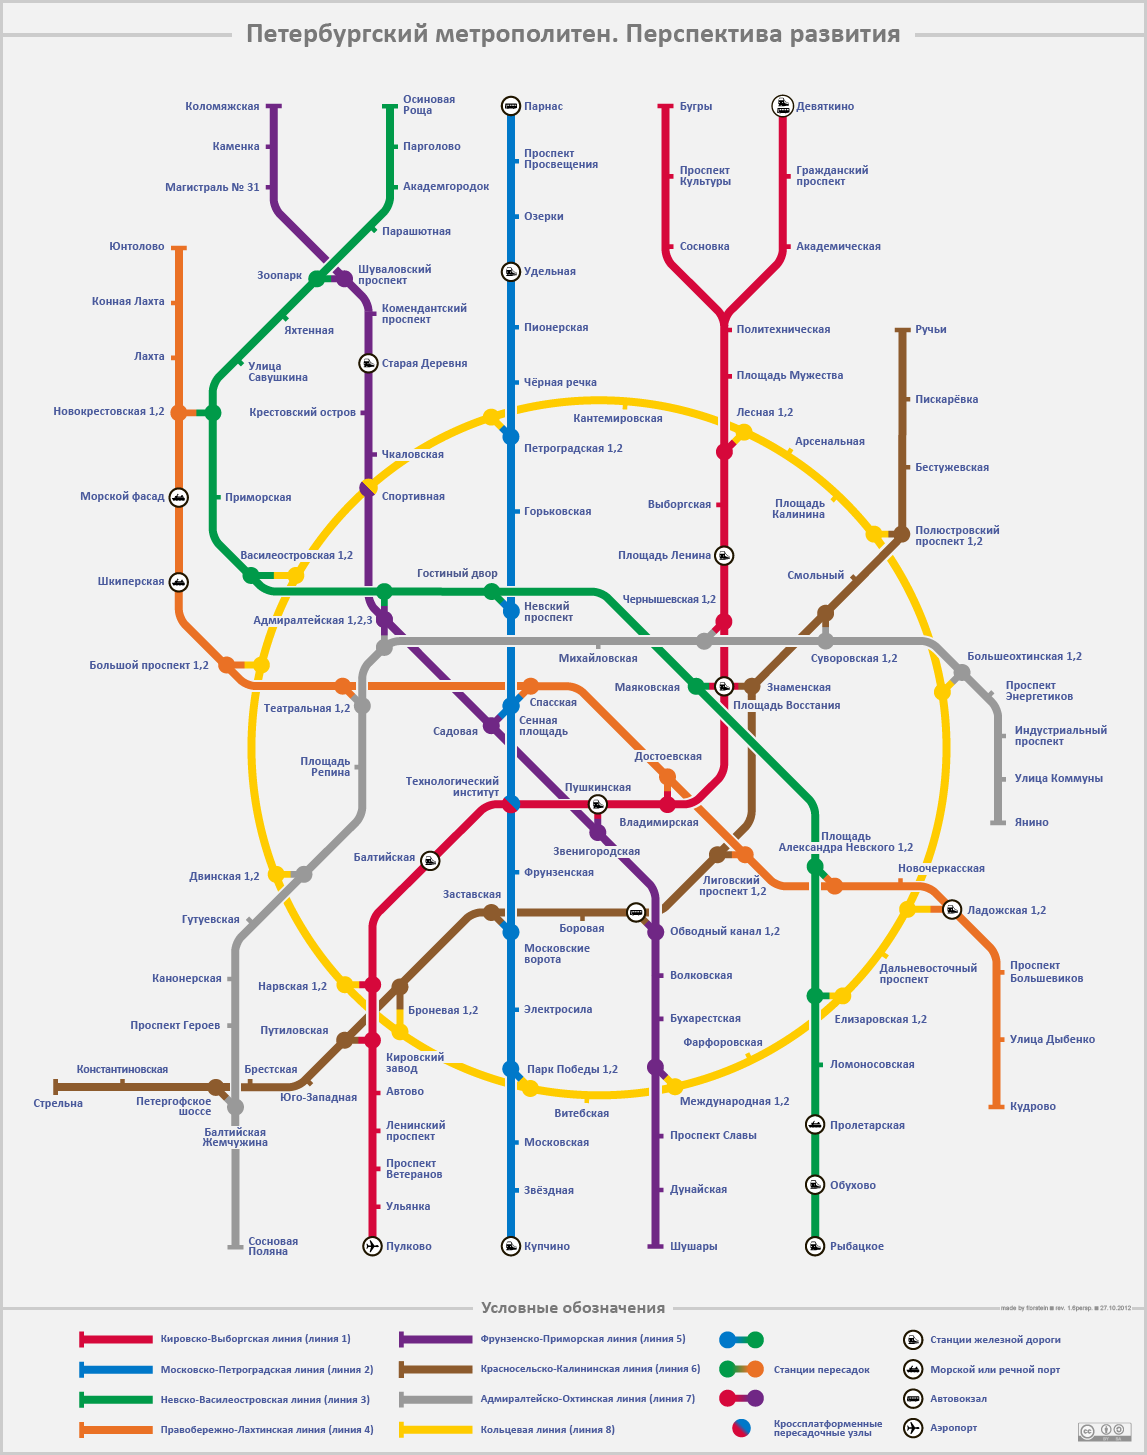 Sankt Peterburgas — Metro — Maps of Projects